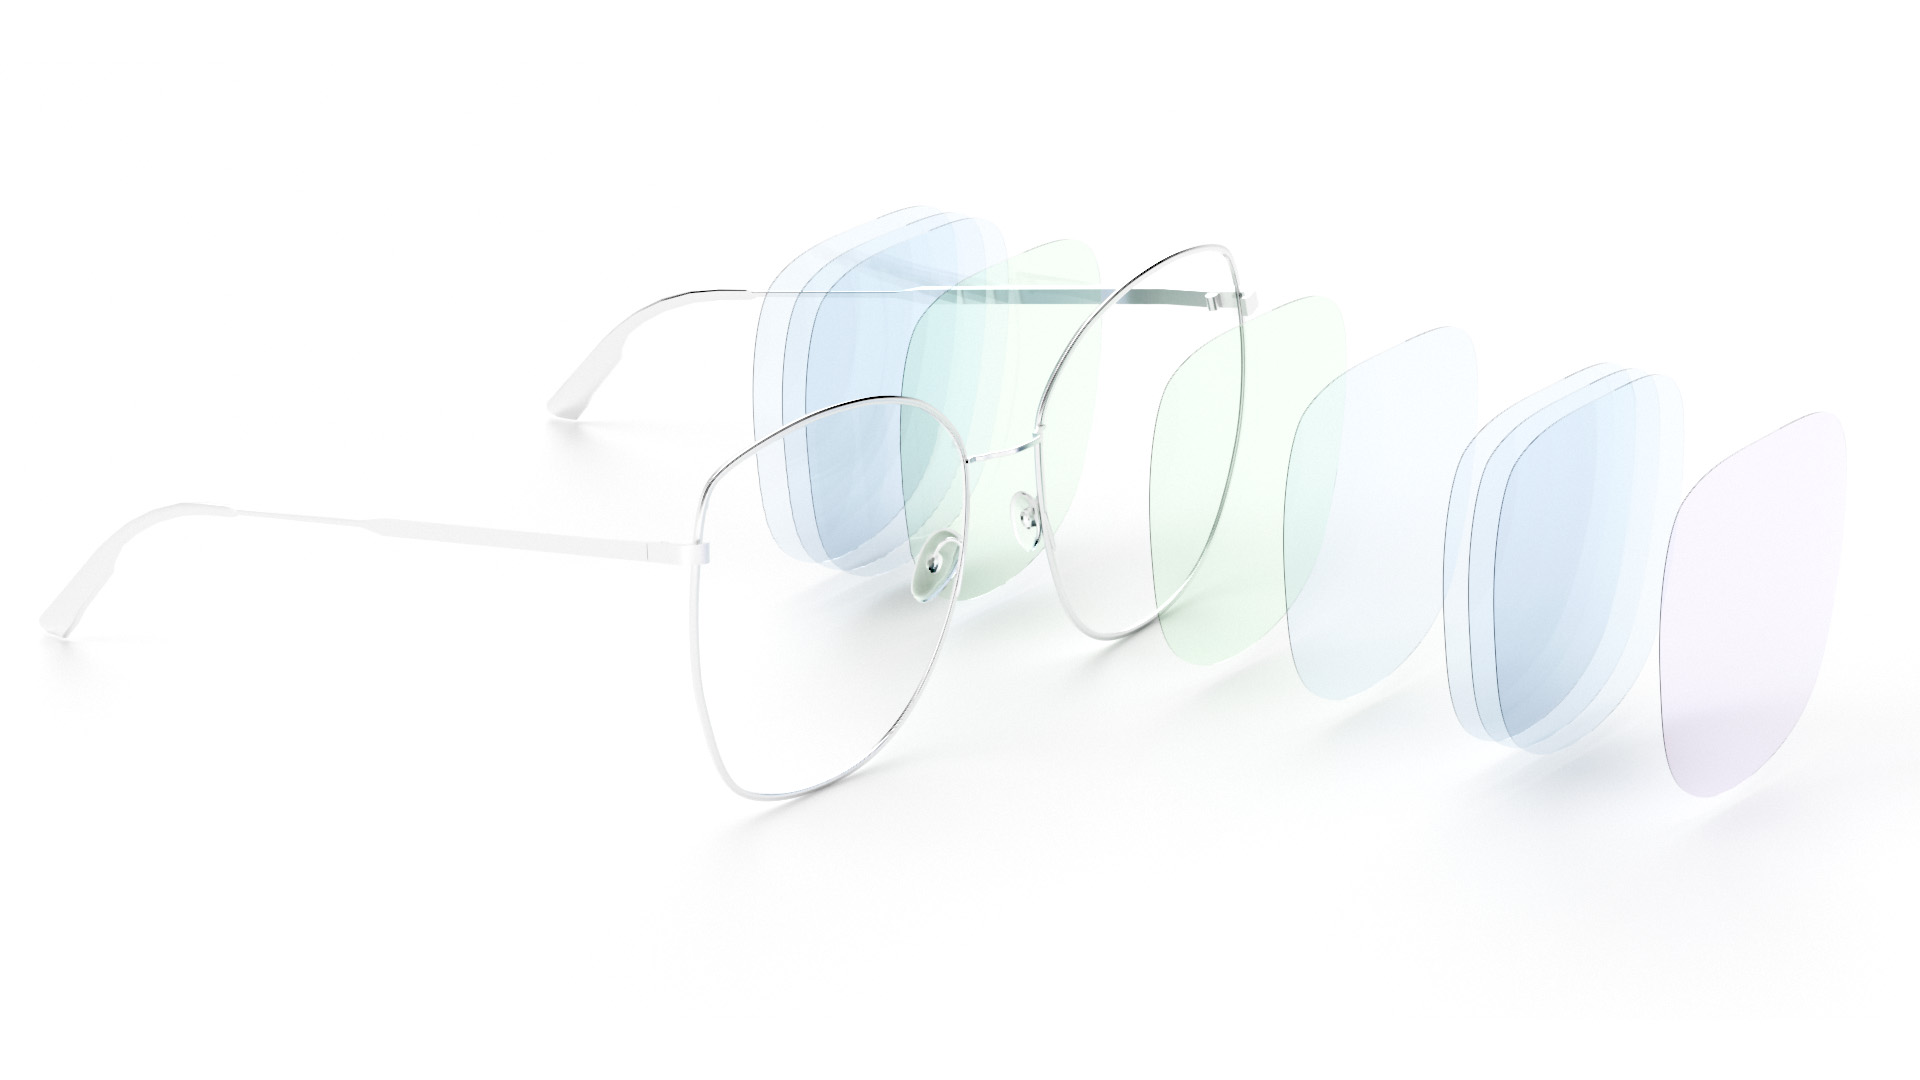 A pair of glasses with the different coating layers visualised.